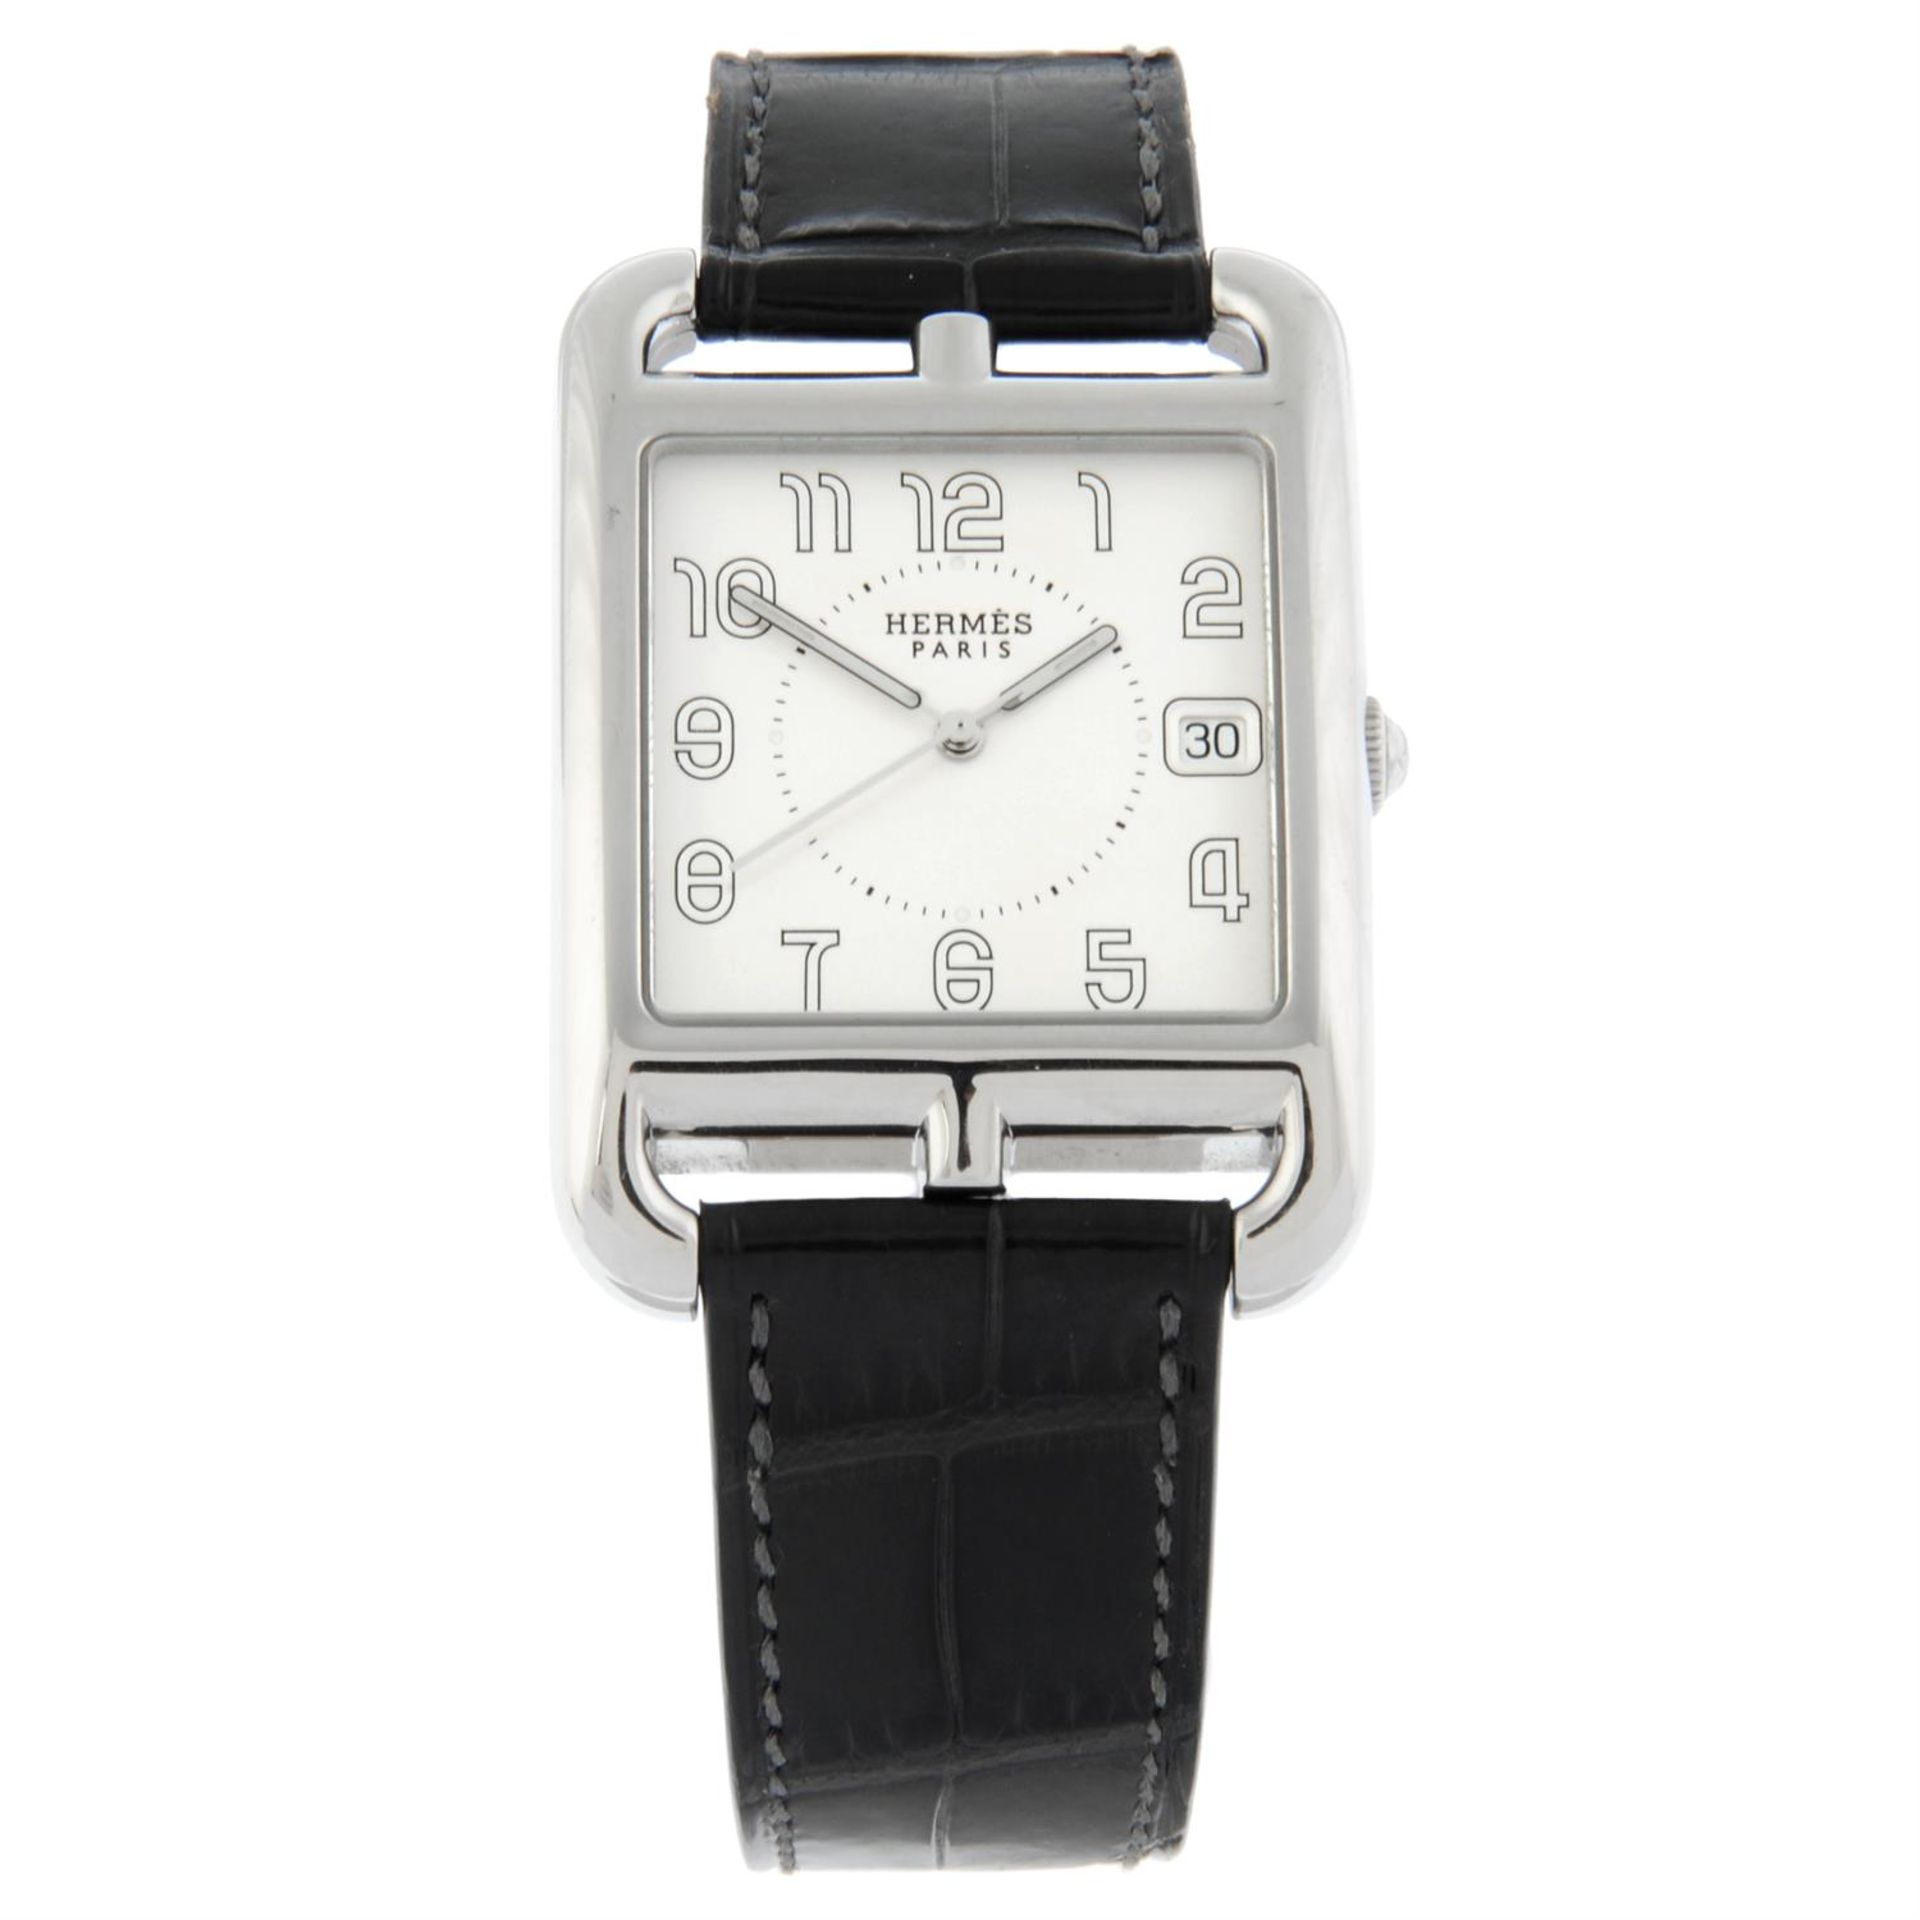 Hermes - a Cape Cod watch, 33x46mm.